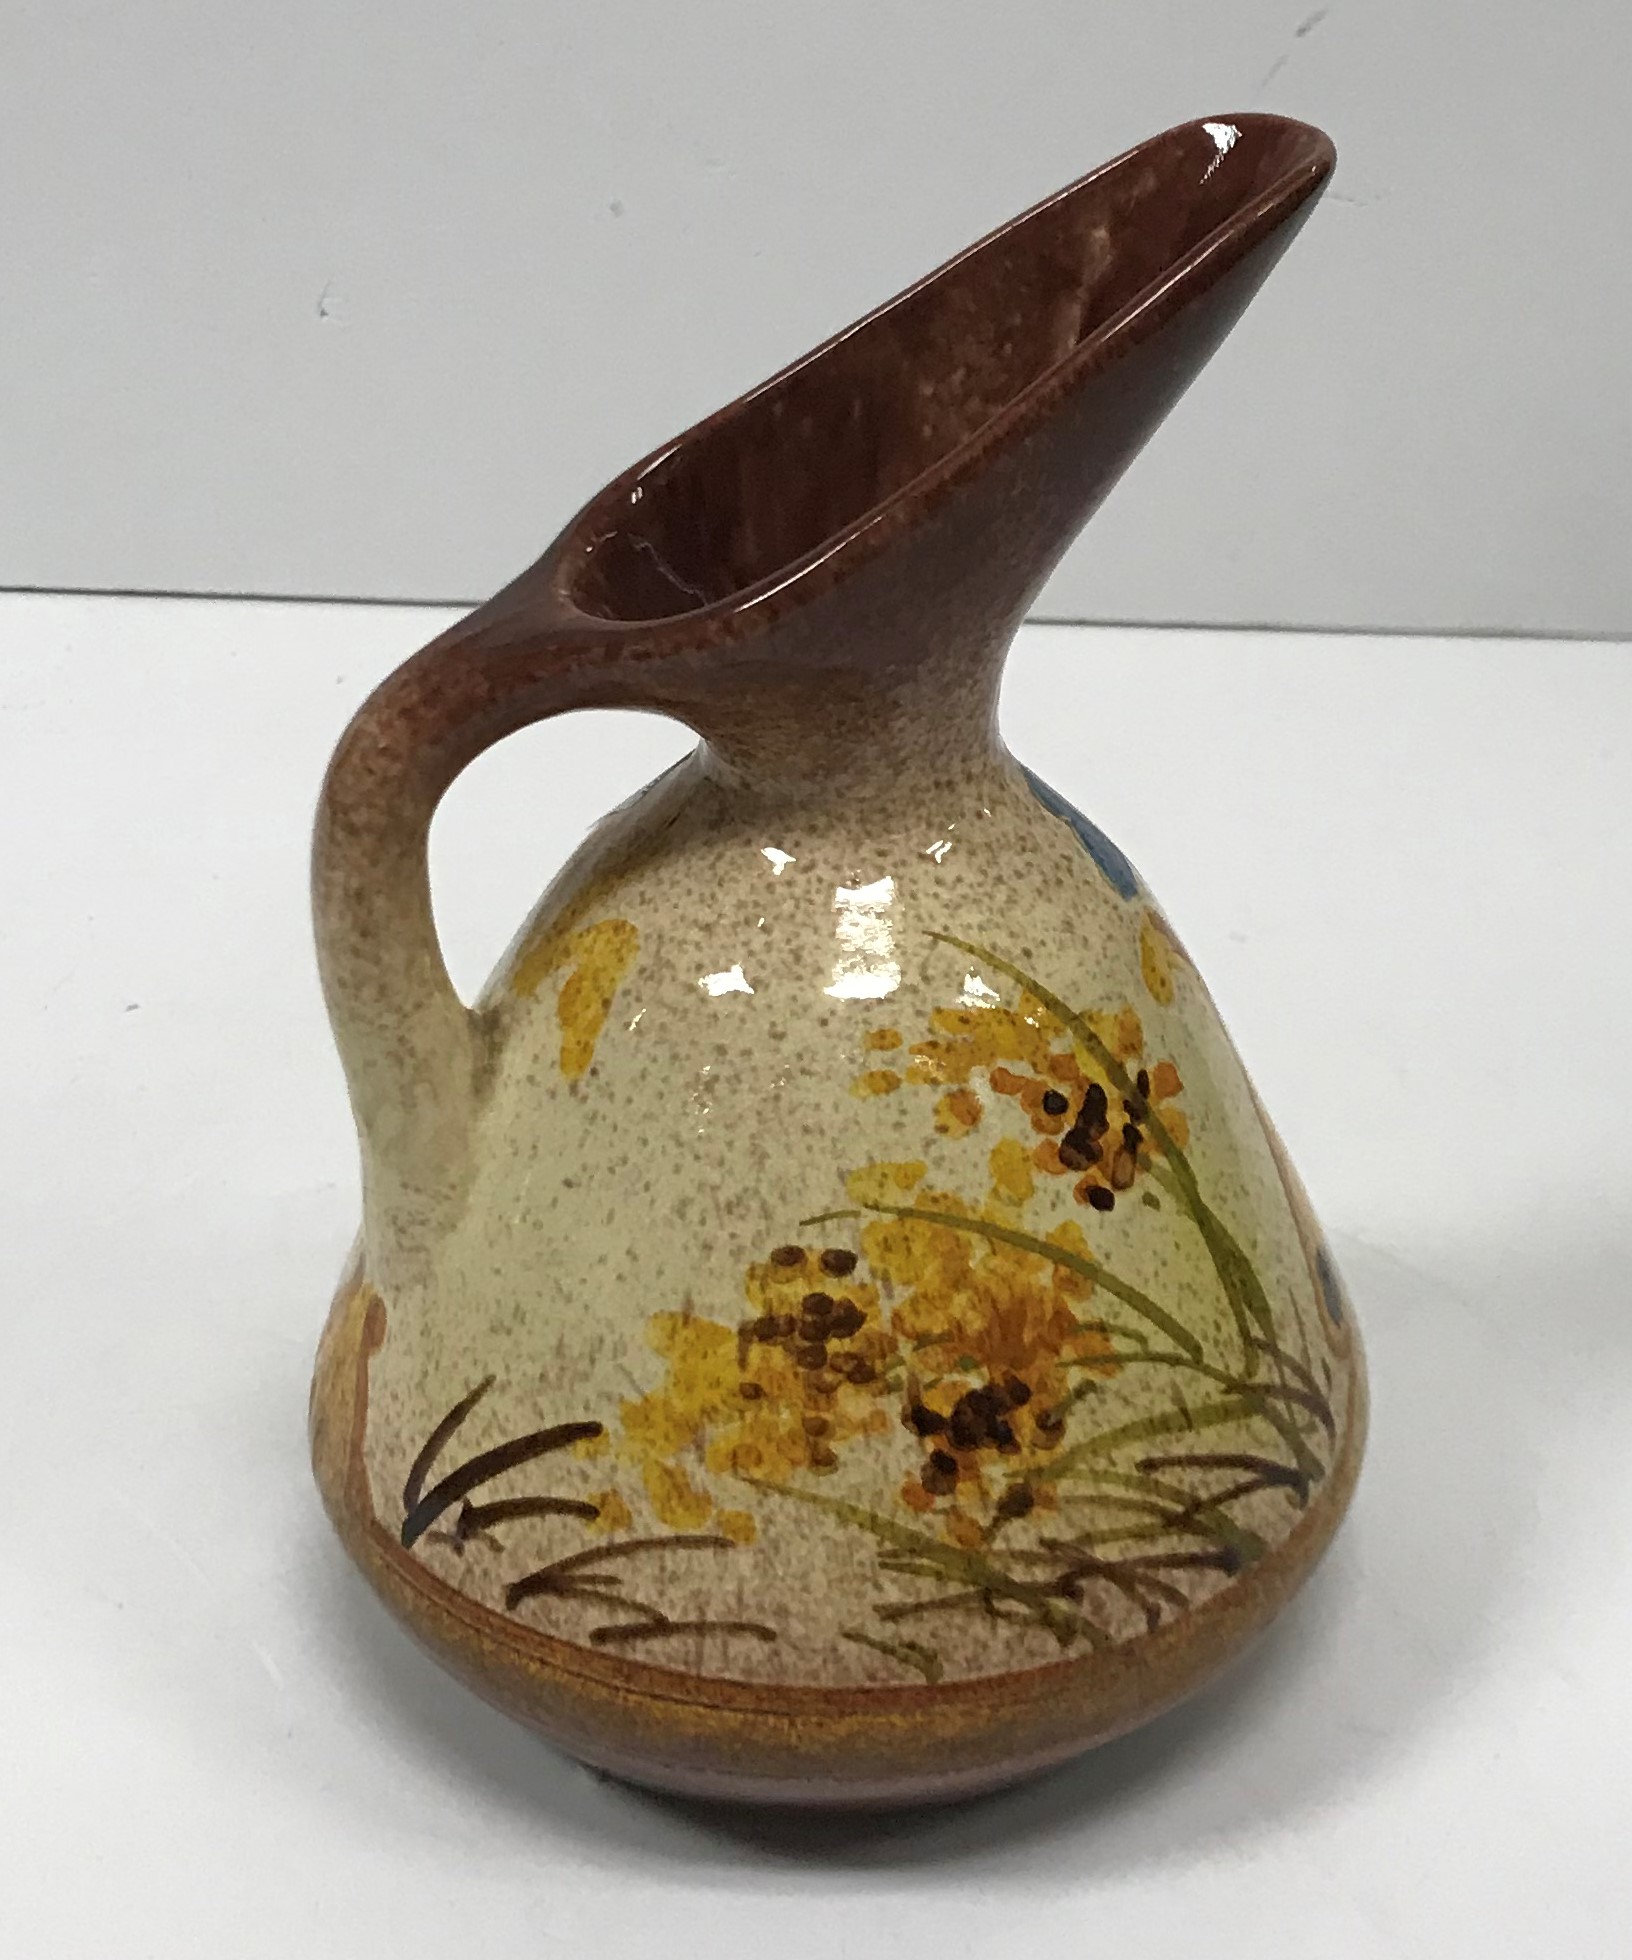 A William Ault Pottery ewer designed by Christopher Dresser with butterfly and foliate decoration